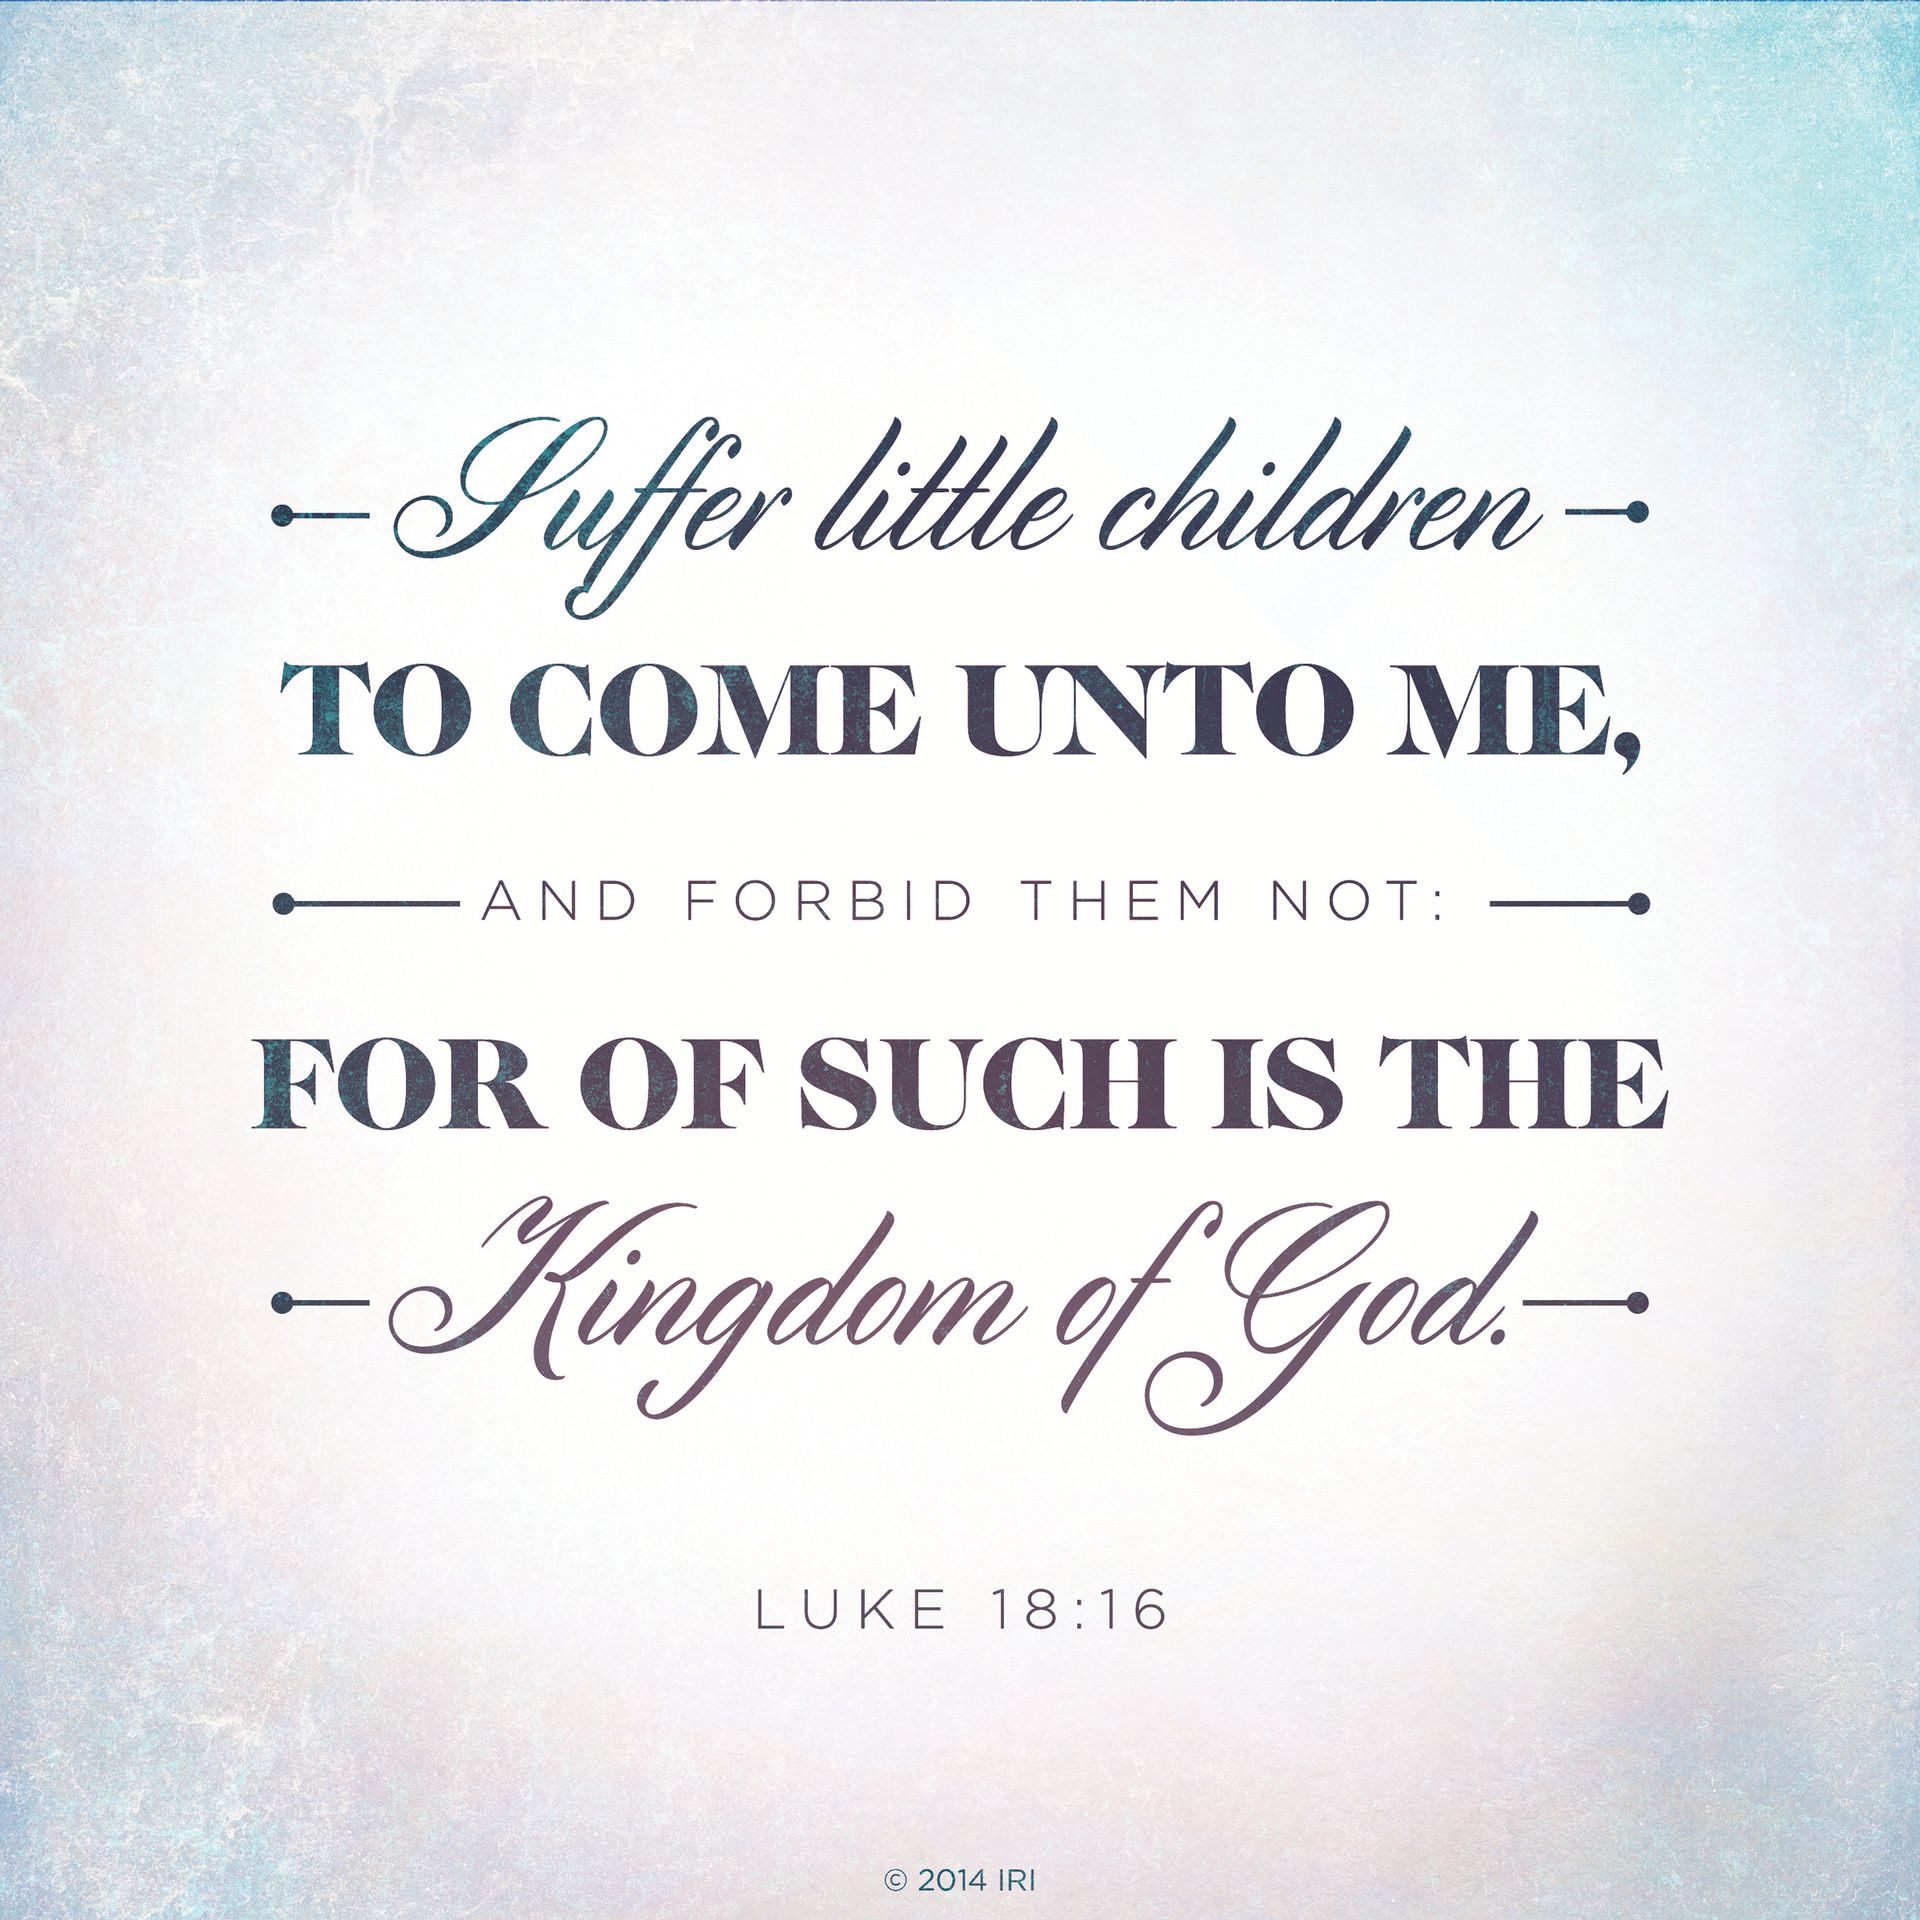 “Suffer little children to come unto me, and forbid them not: for of such is the kingdom of God.”—Luke 18:16